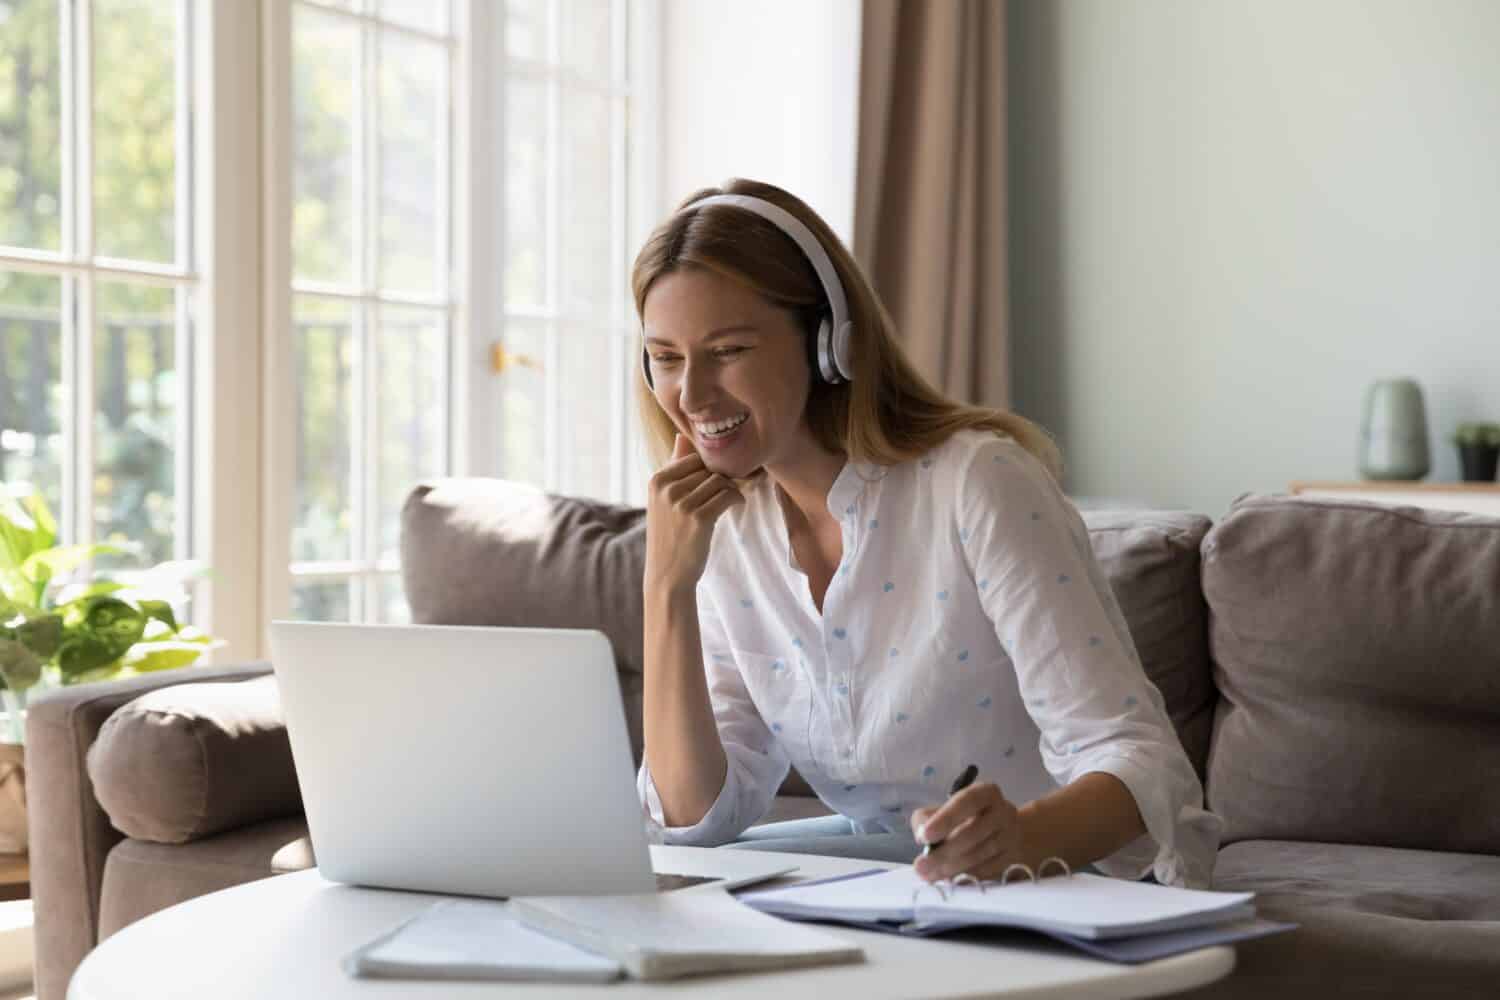 Woman in headphones studying from home using video call app, sit at table with laptop, makes notes improve English knowledge with on-line tutor. Remote class, new skills, virtual meeting event